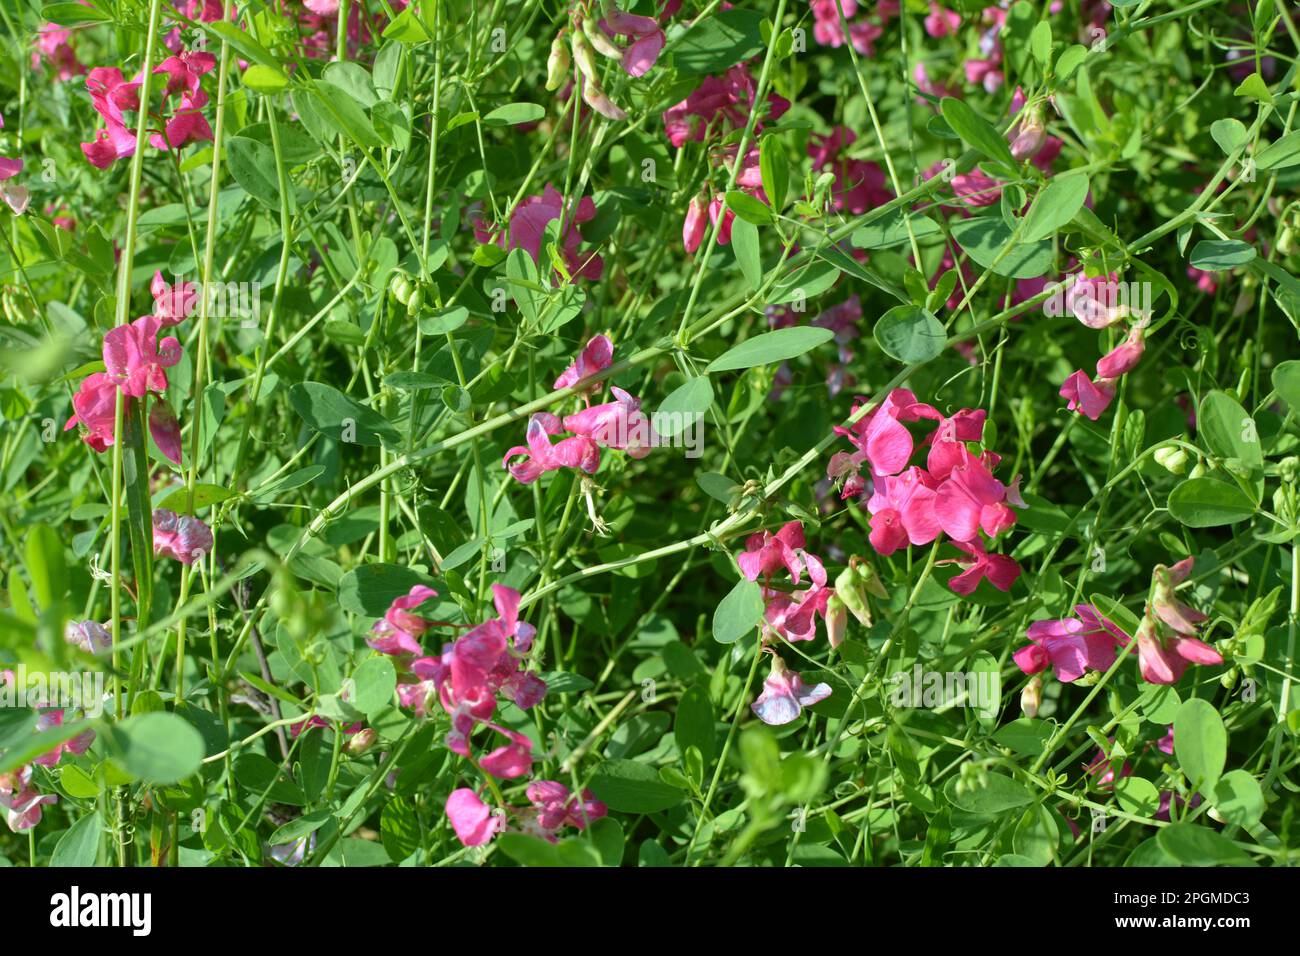 In summer, Lathyrus tuberosus grows among the grasses in the field Stock Photo